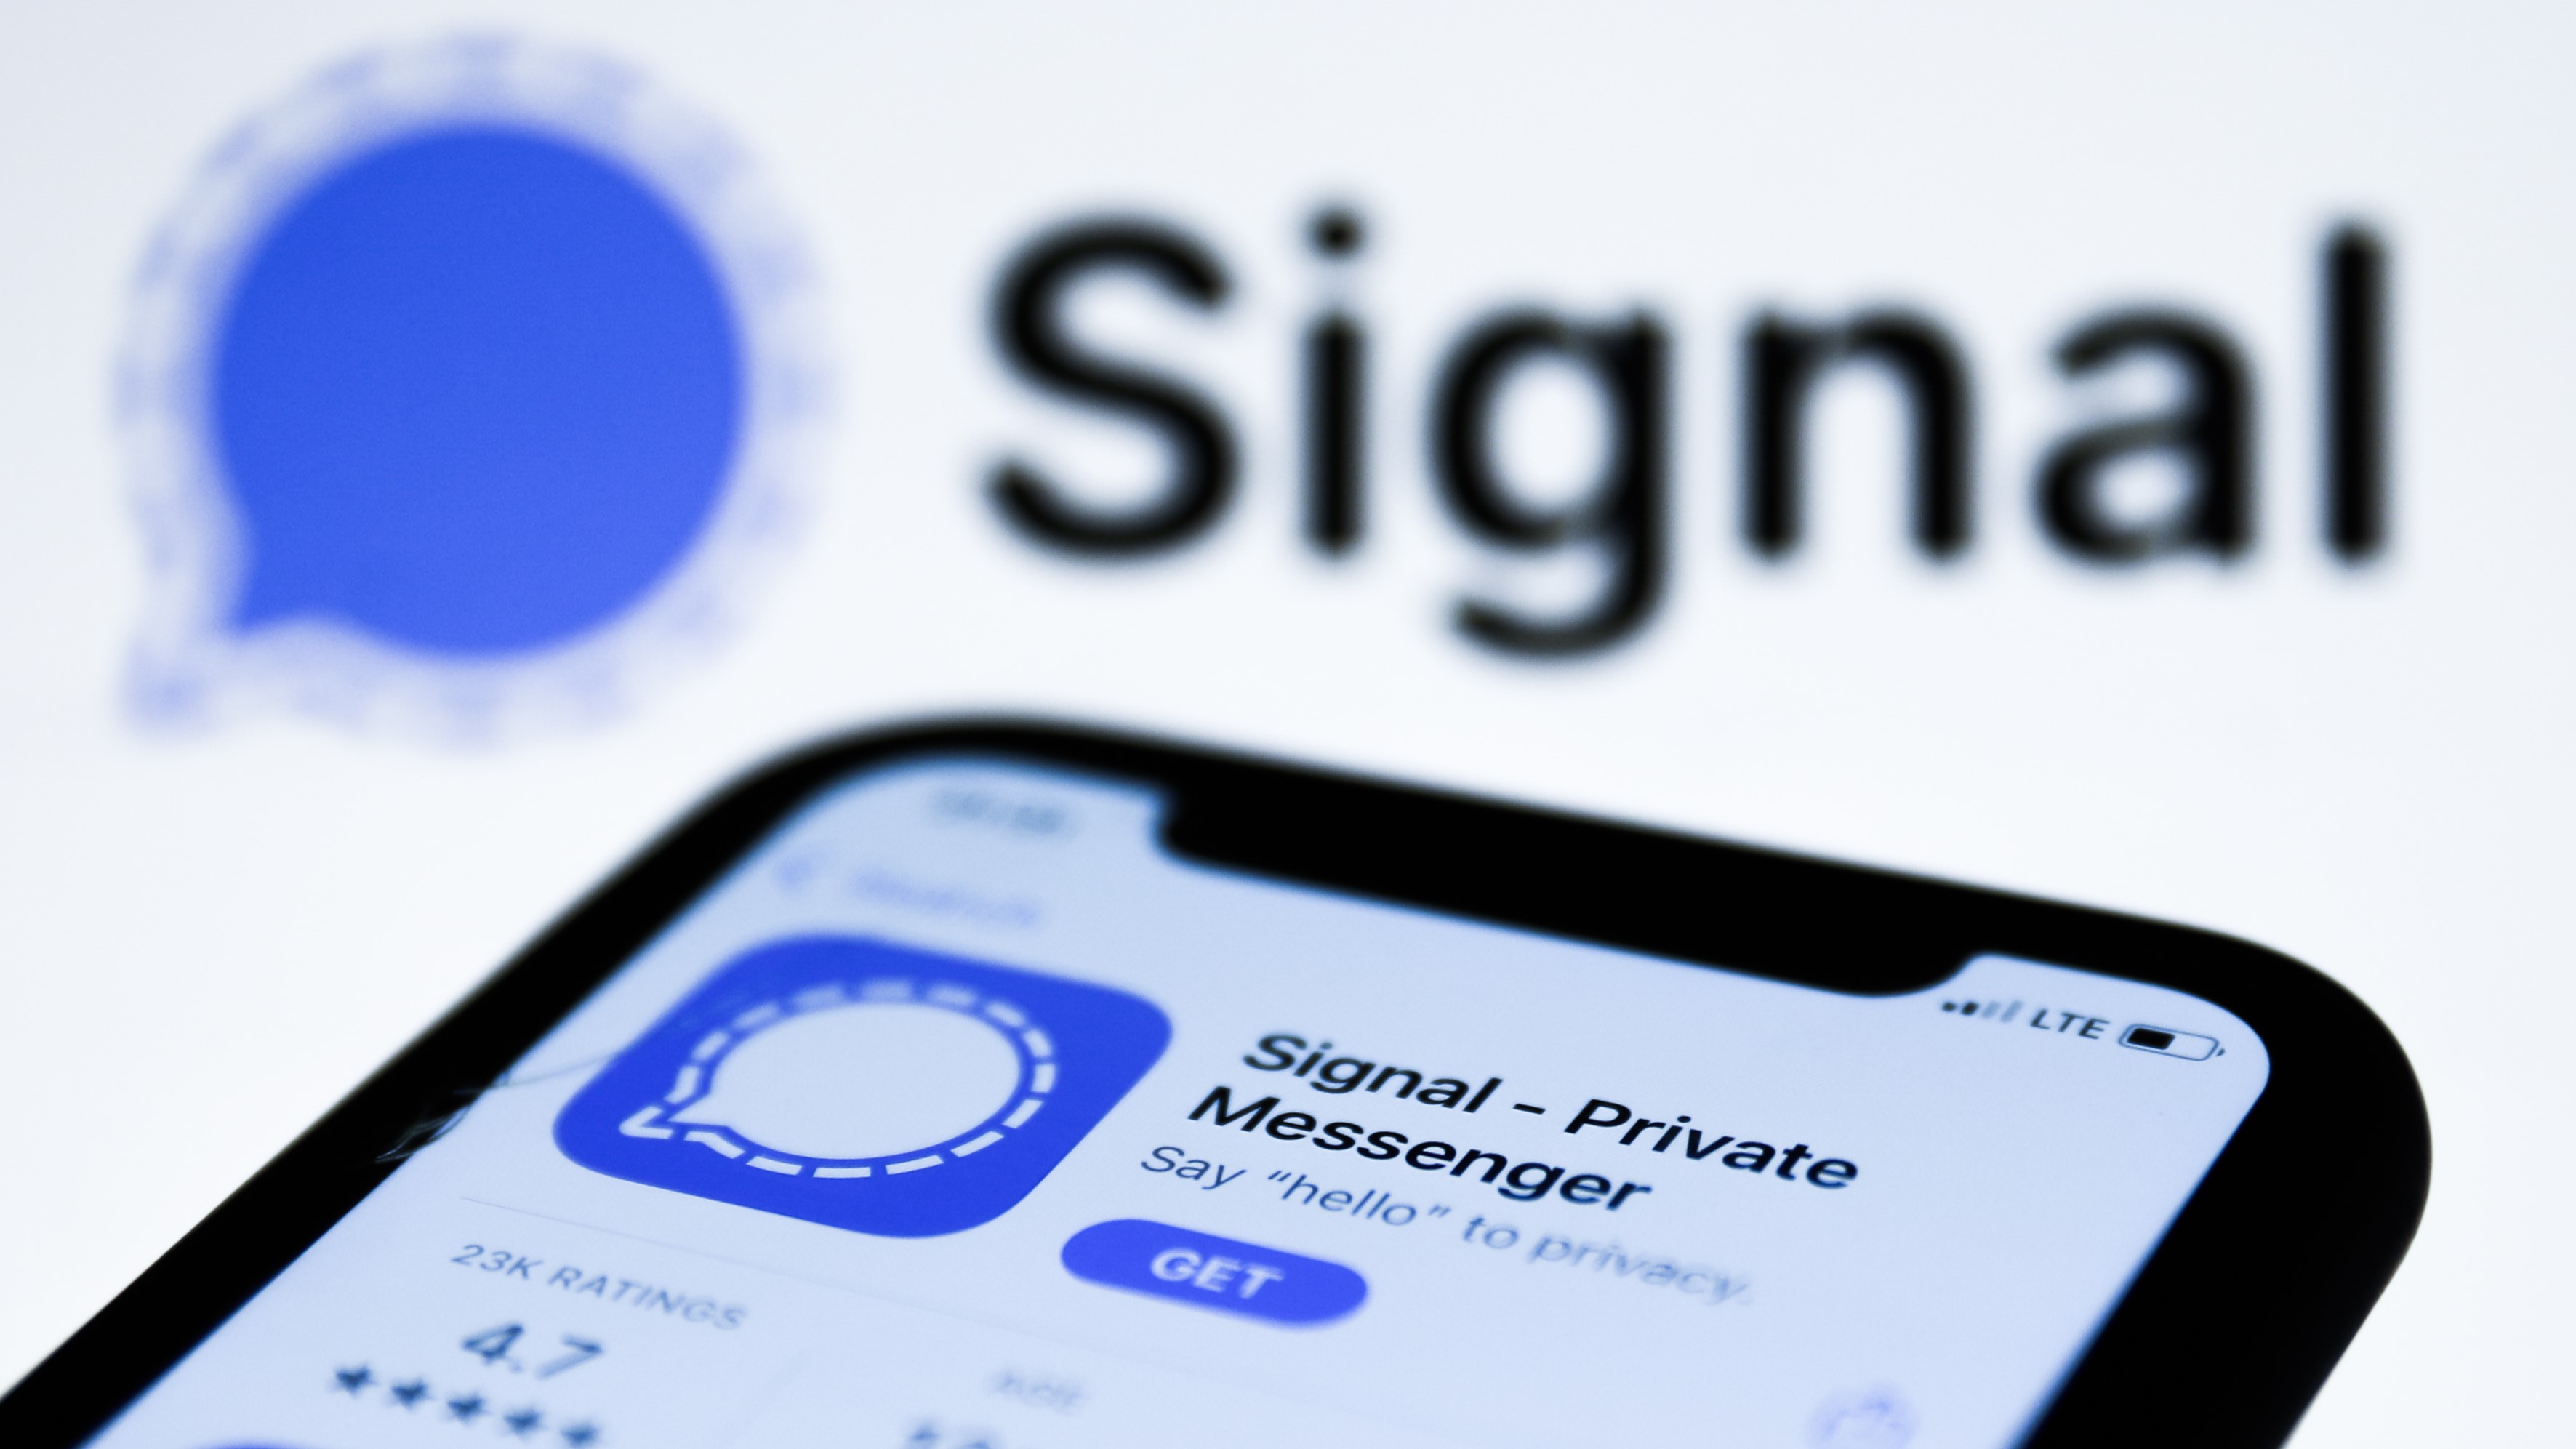 Signal officially abandons phone numbers sharing in the name of privacy